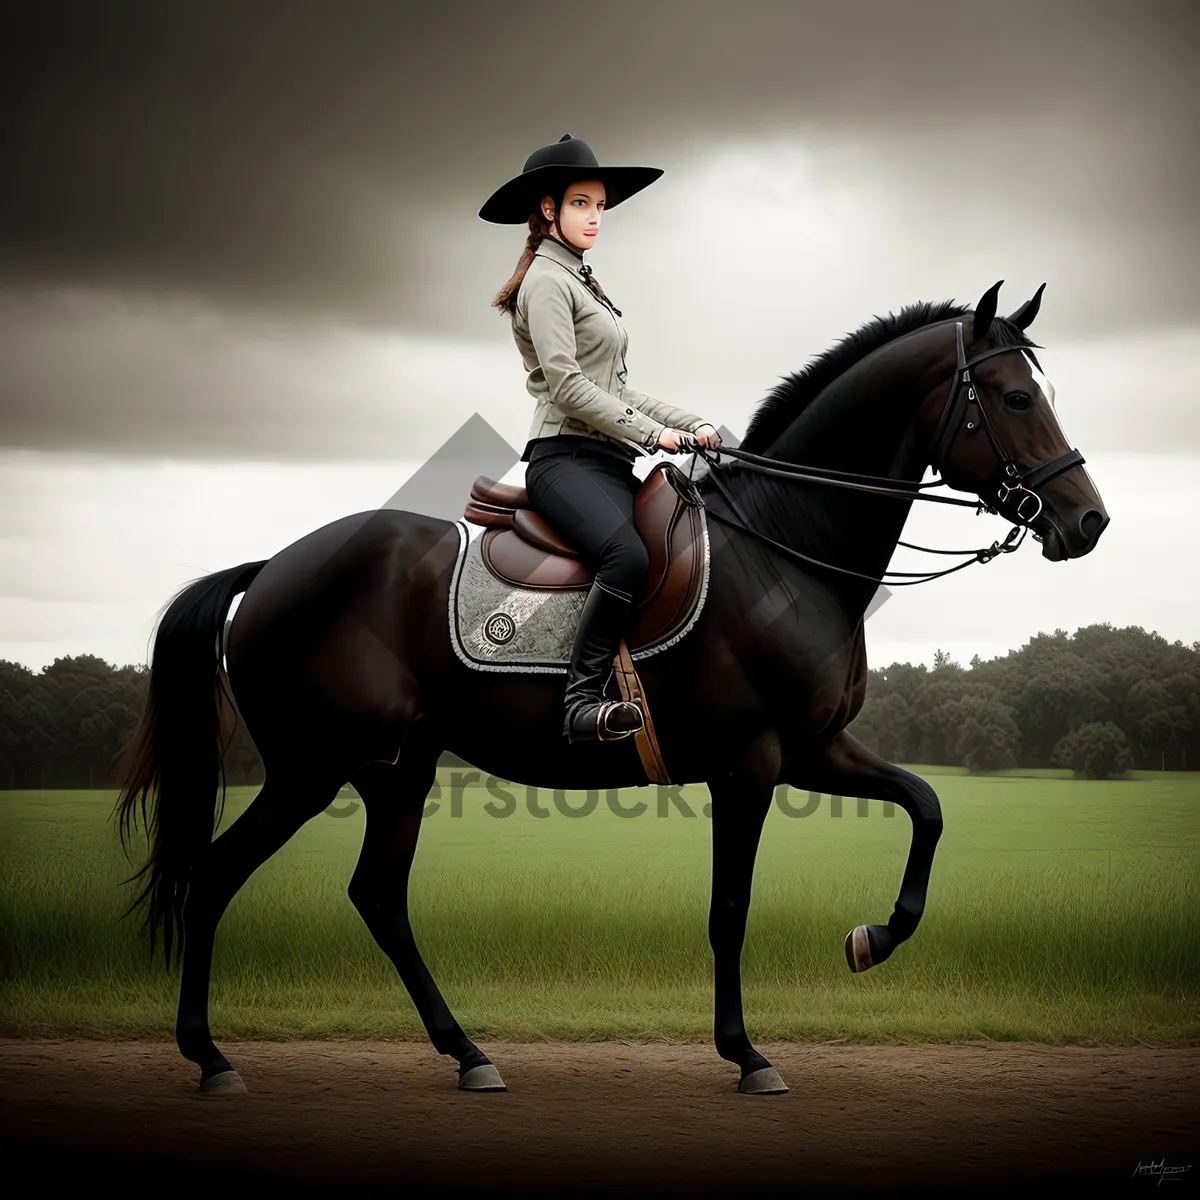 Picture of Stunning Stallion's Equestrian Riding Gear on Grass